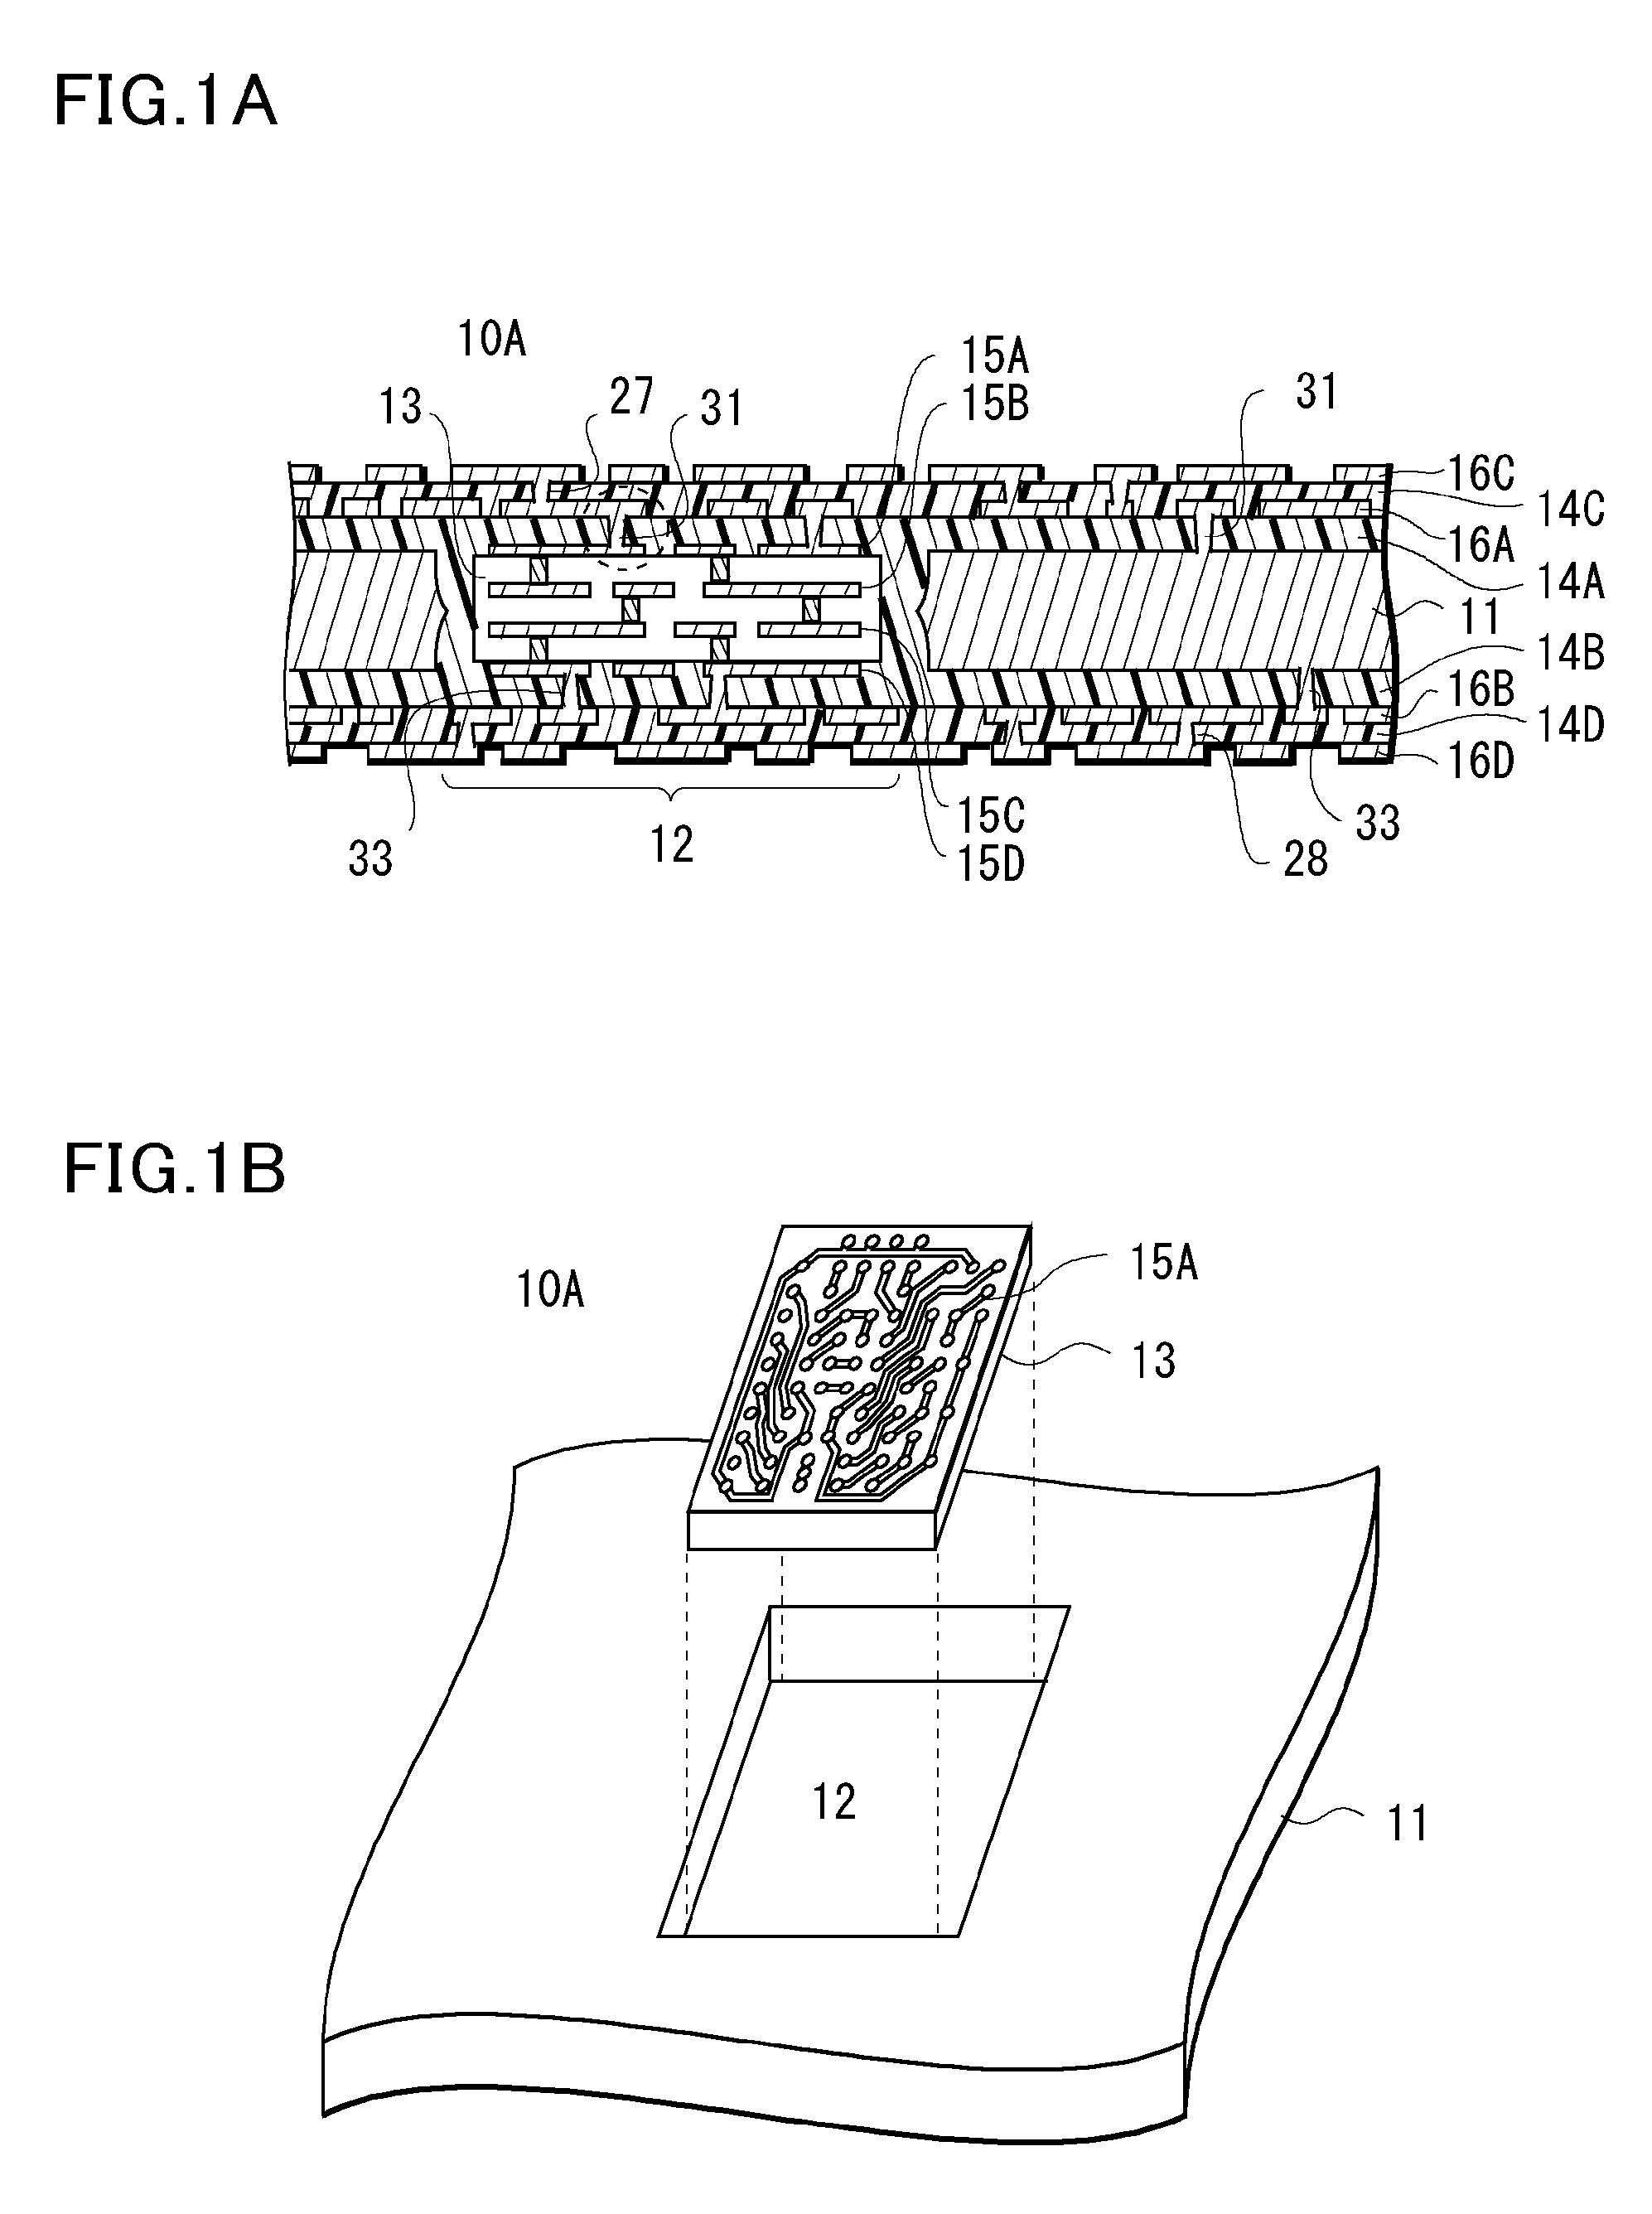 Multilayer printed circuit board and manufacturing method therefor